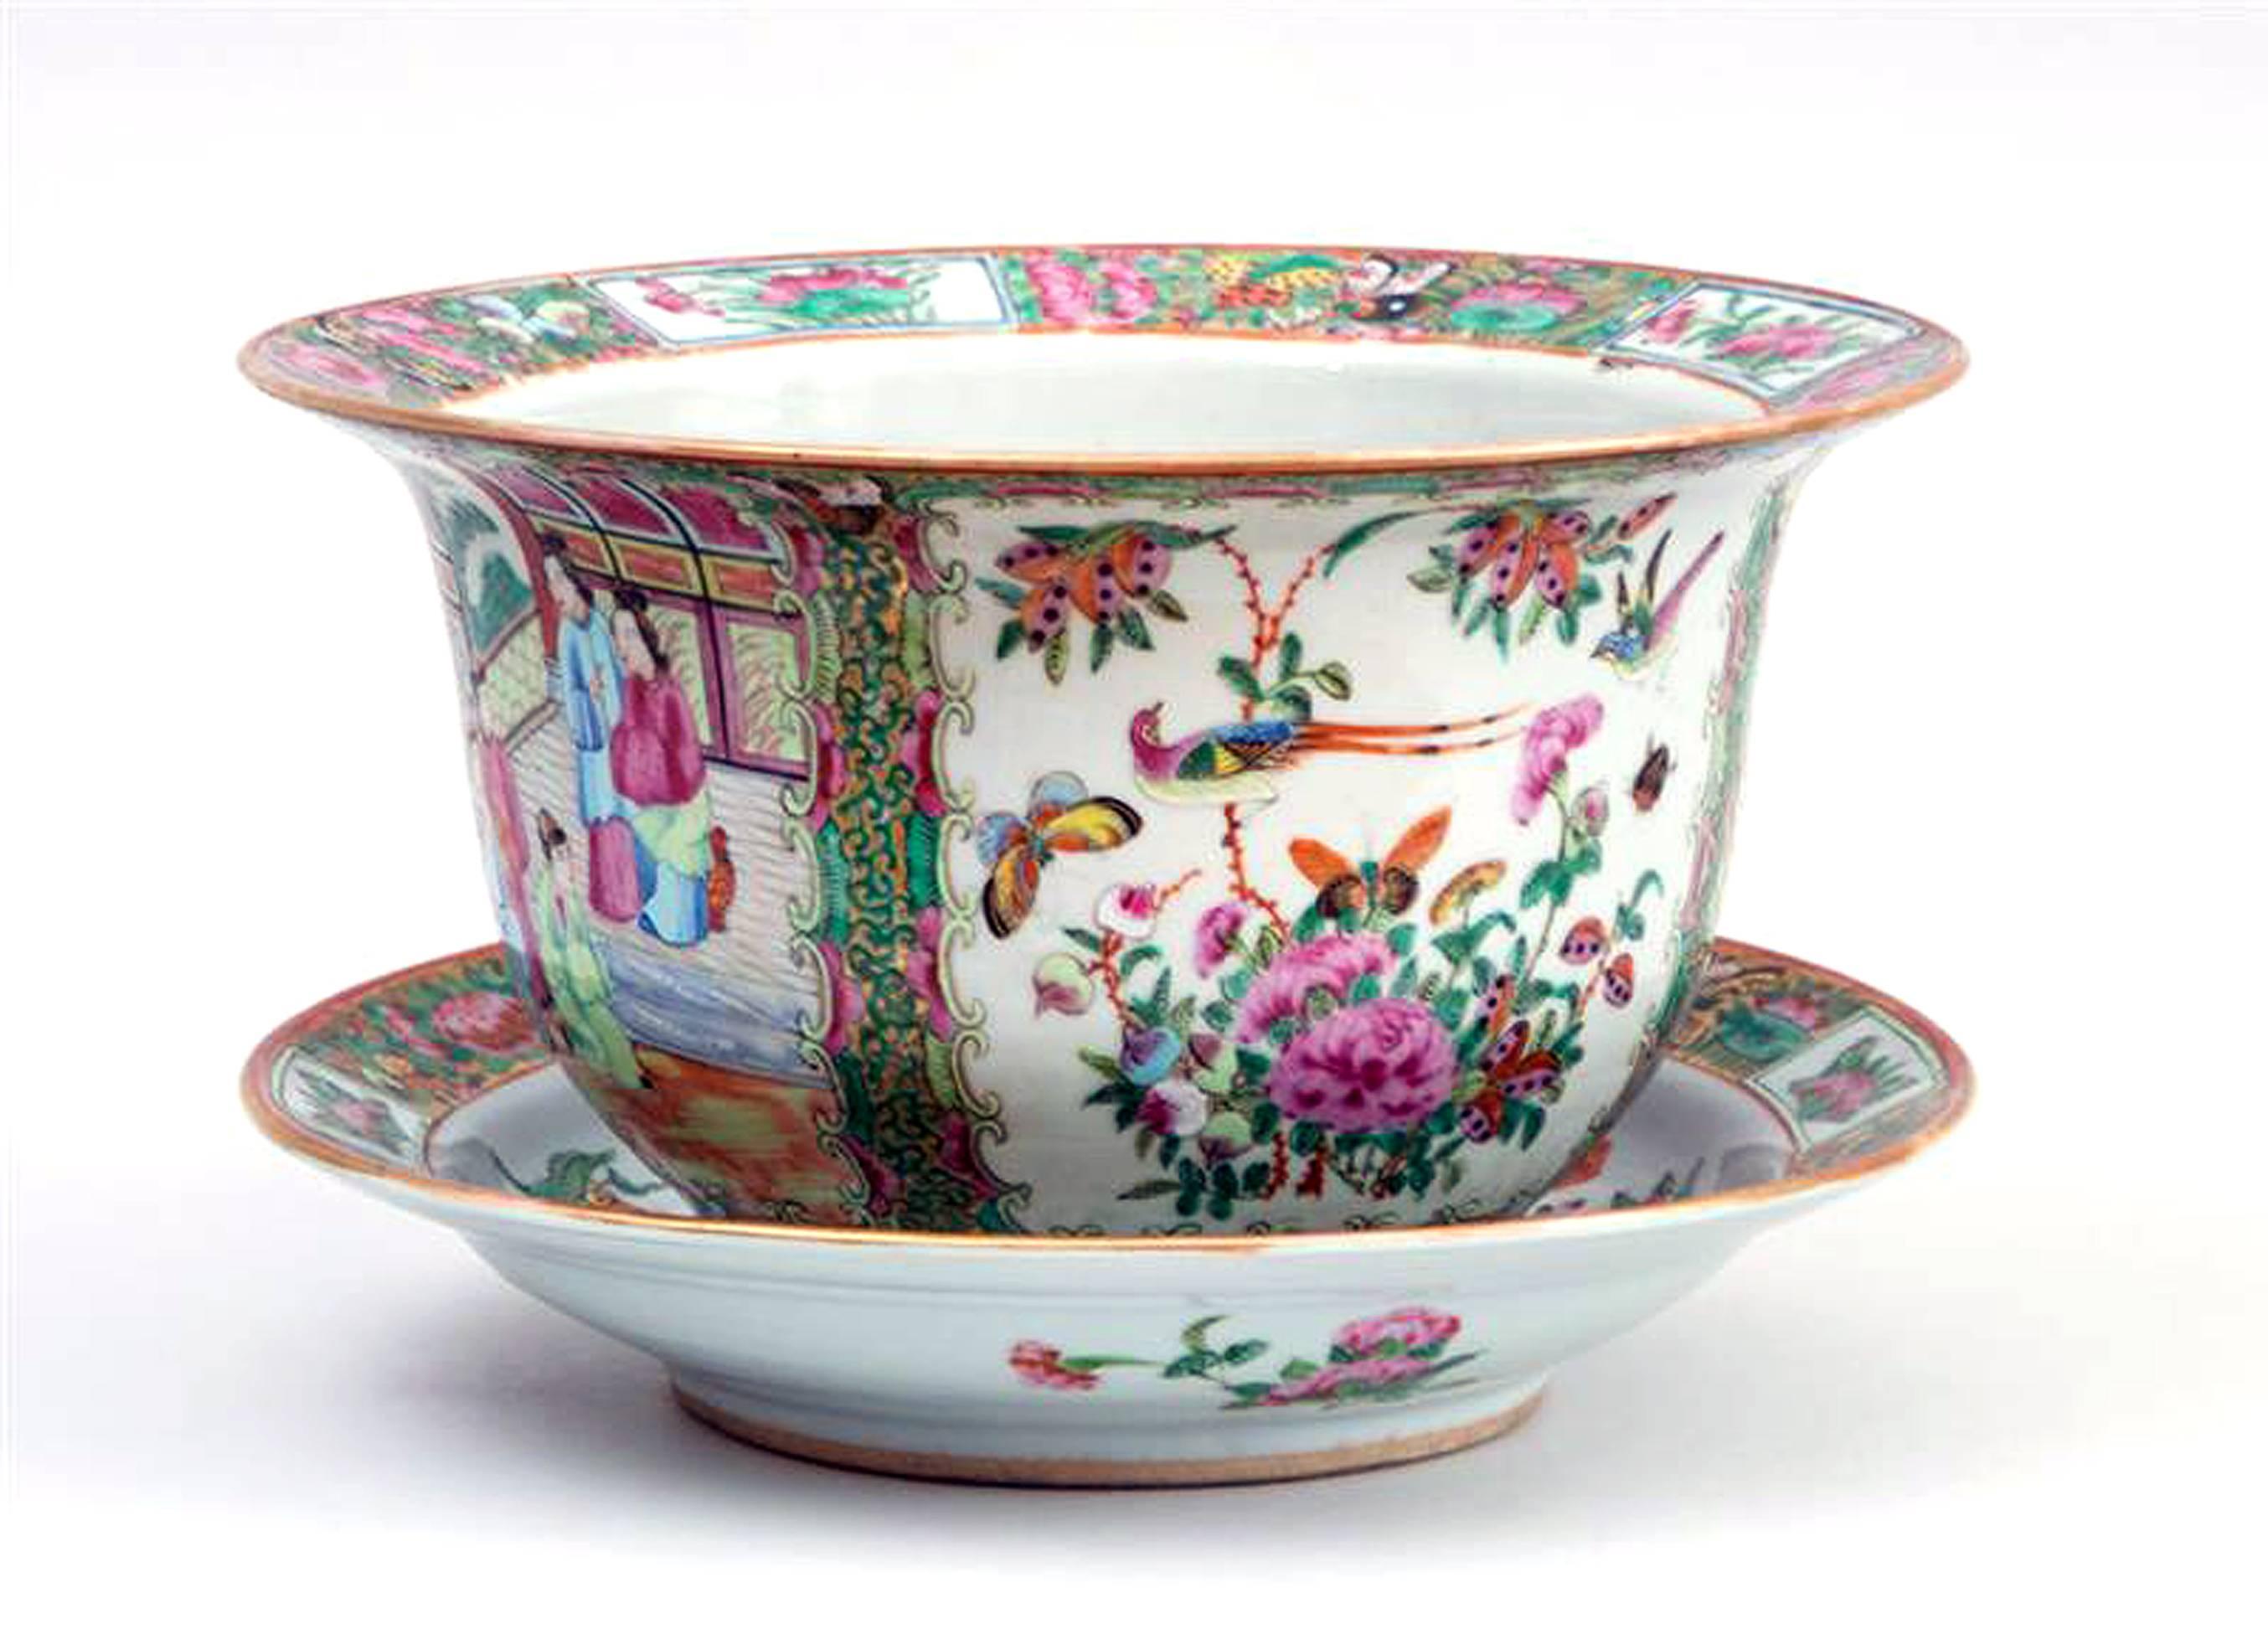 Chinese export large canton Rose Medallion porcelain cache pot and stand, circa 1840-1860.

The large Chinese export canton rose medallion cache pot and stand is painted in typical colors with figures and flowers.

 